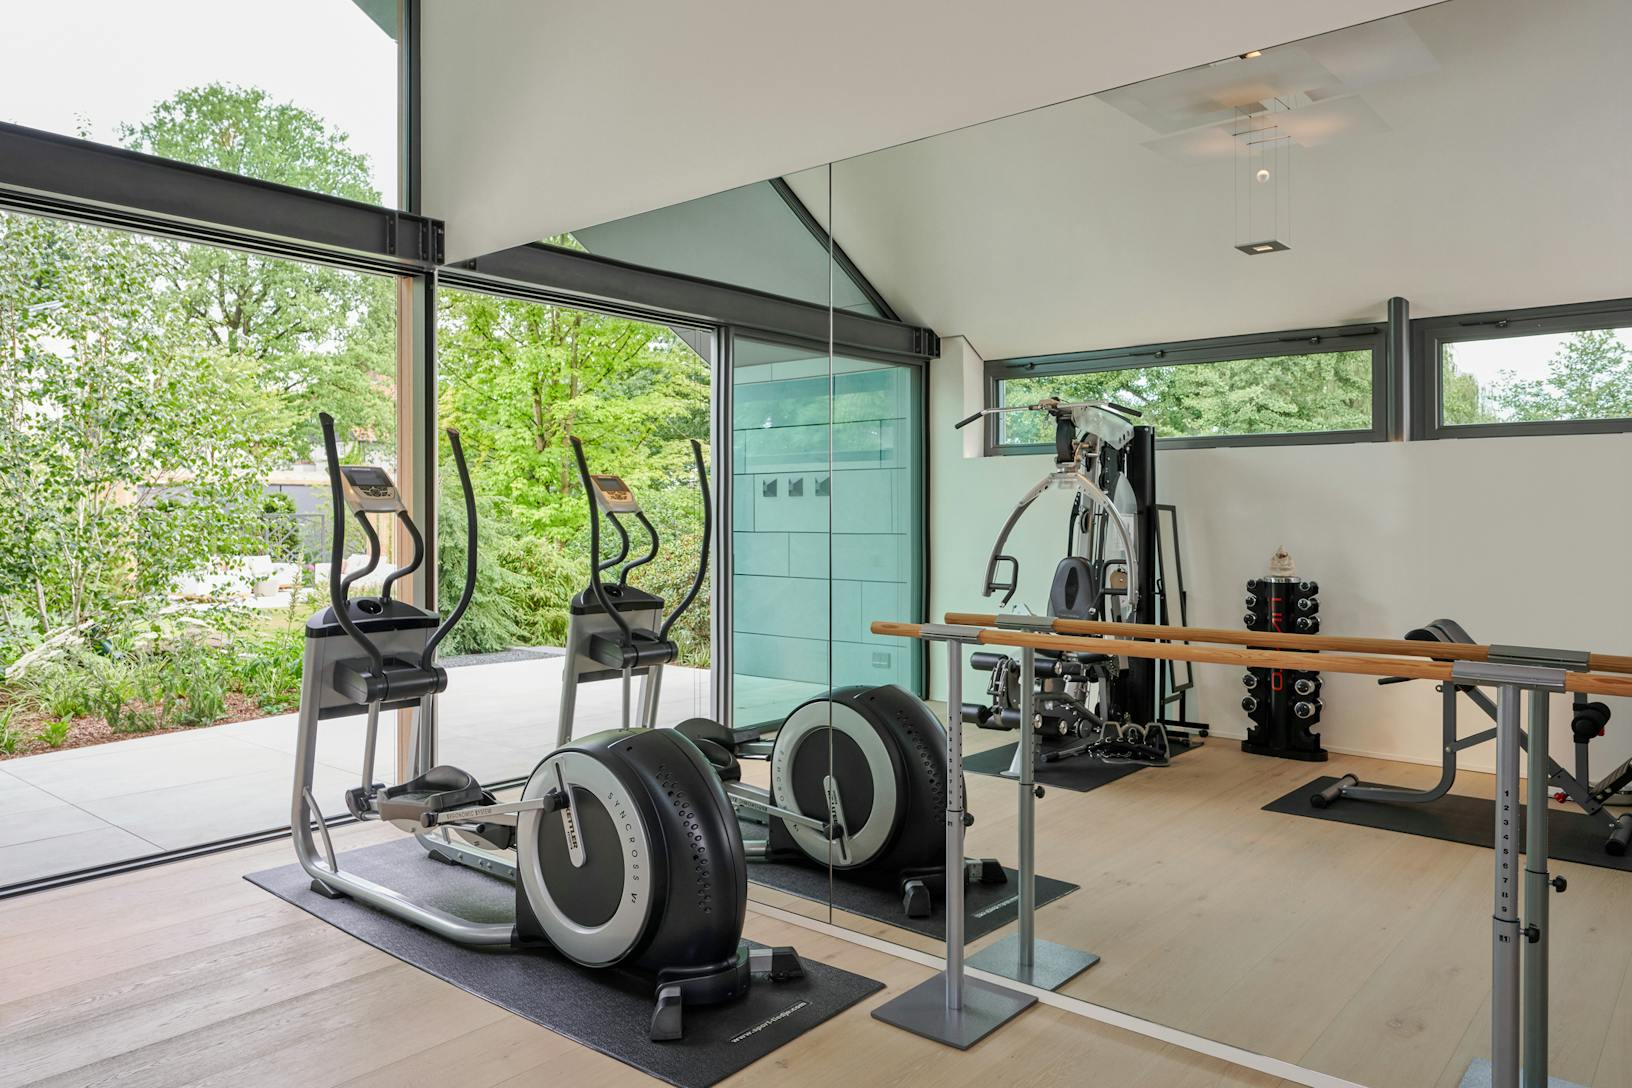 A gym room with exercise equipment and a large glass wall